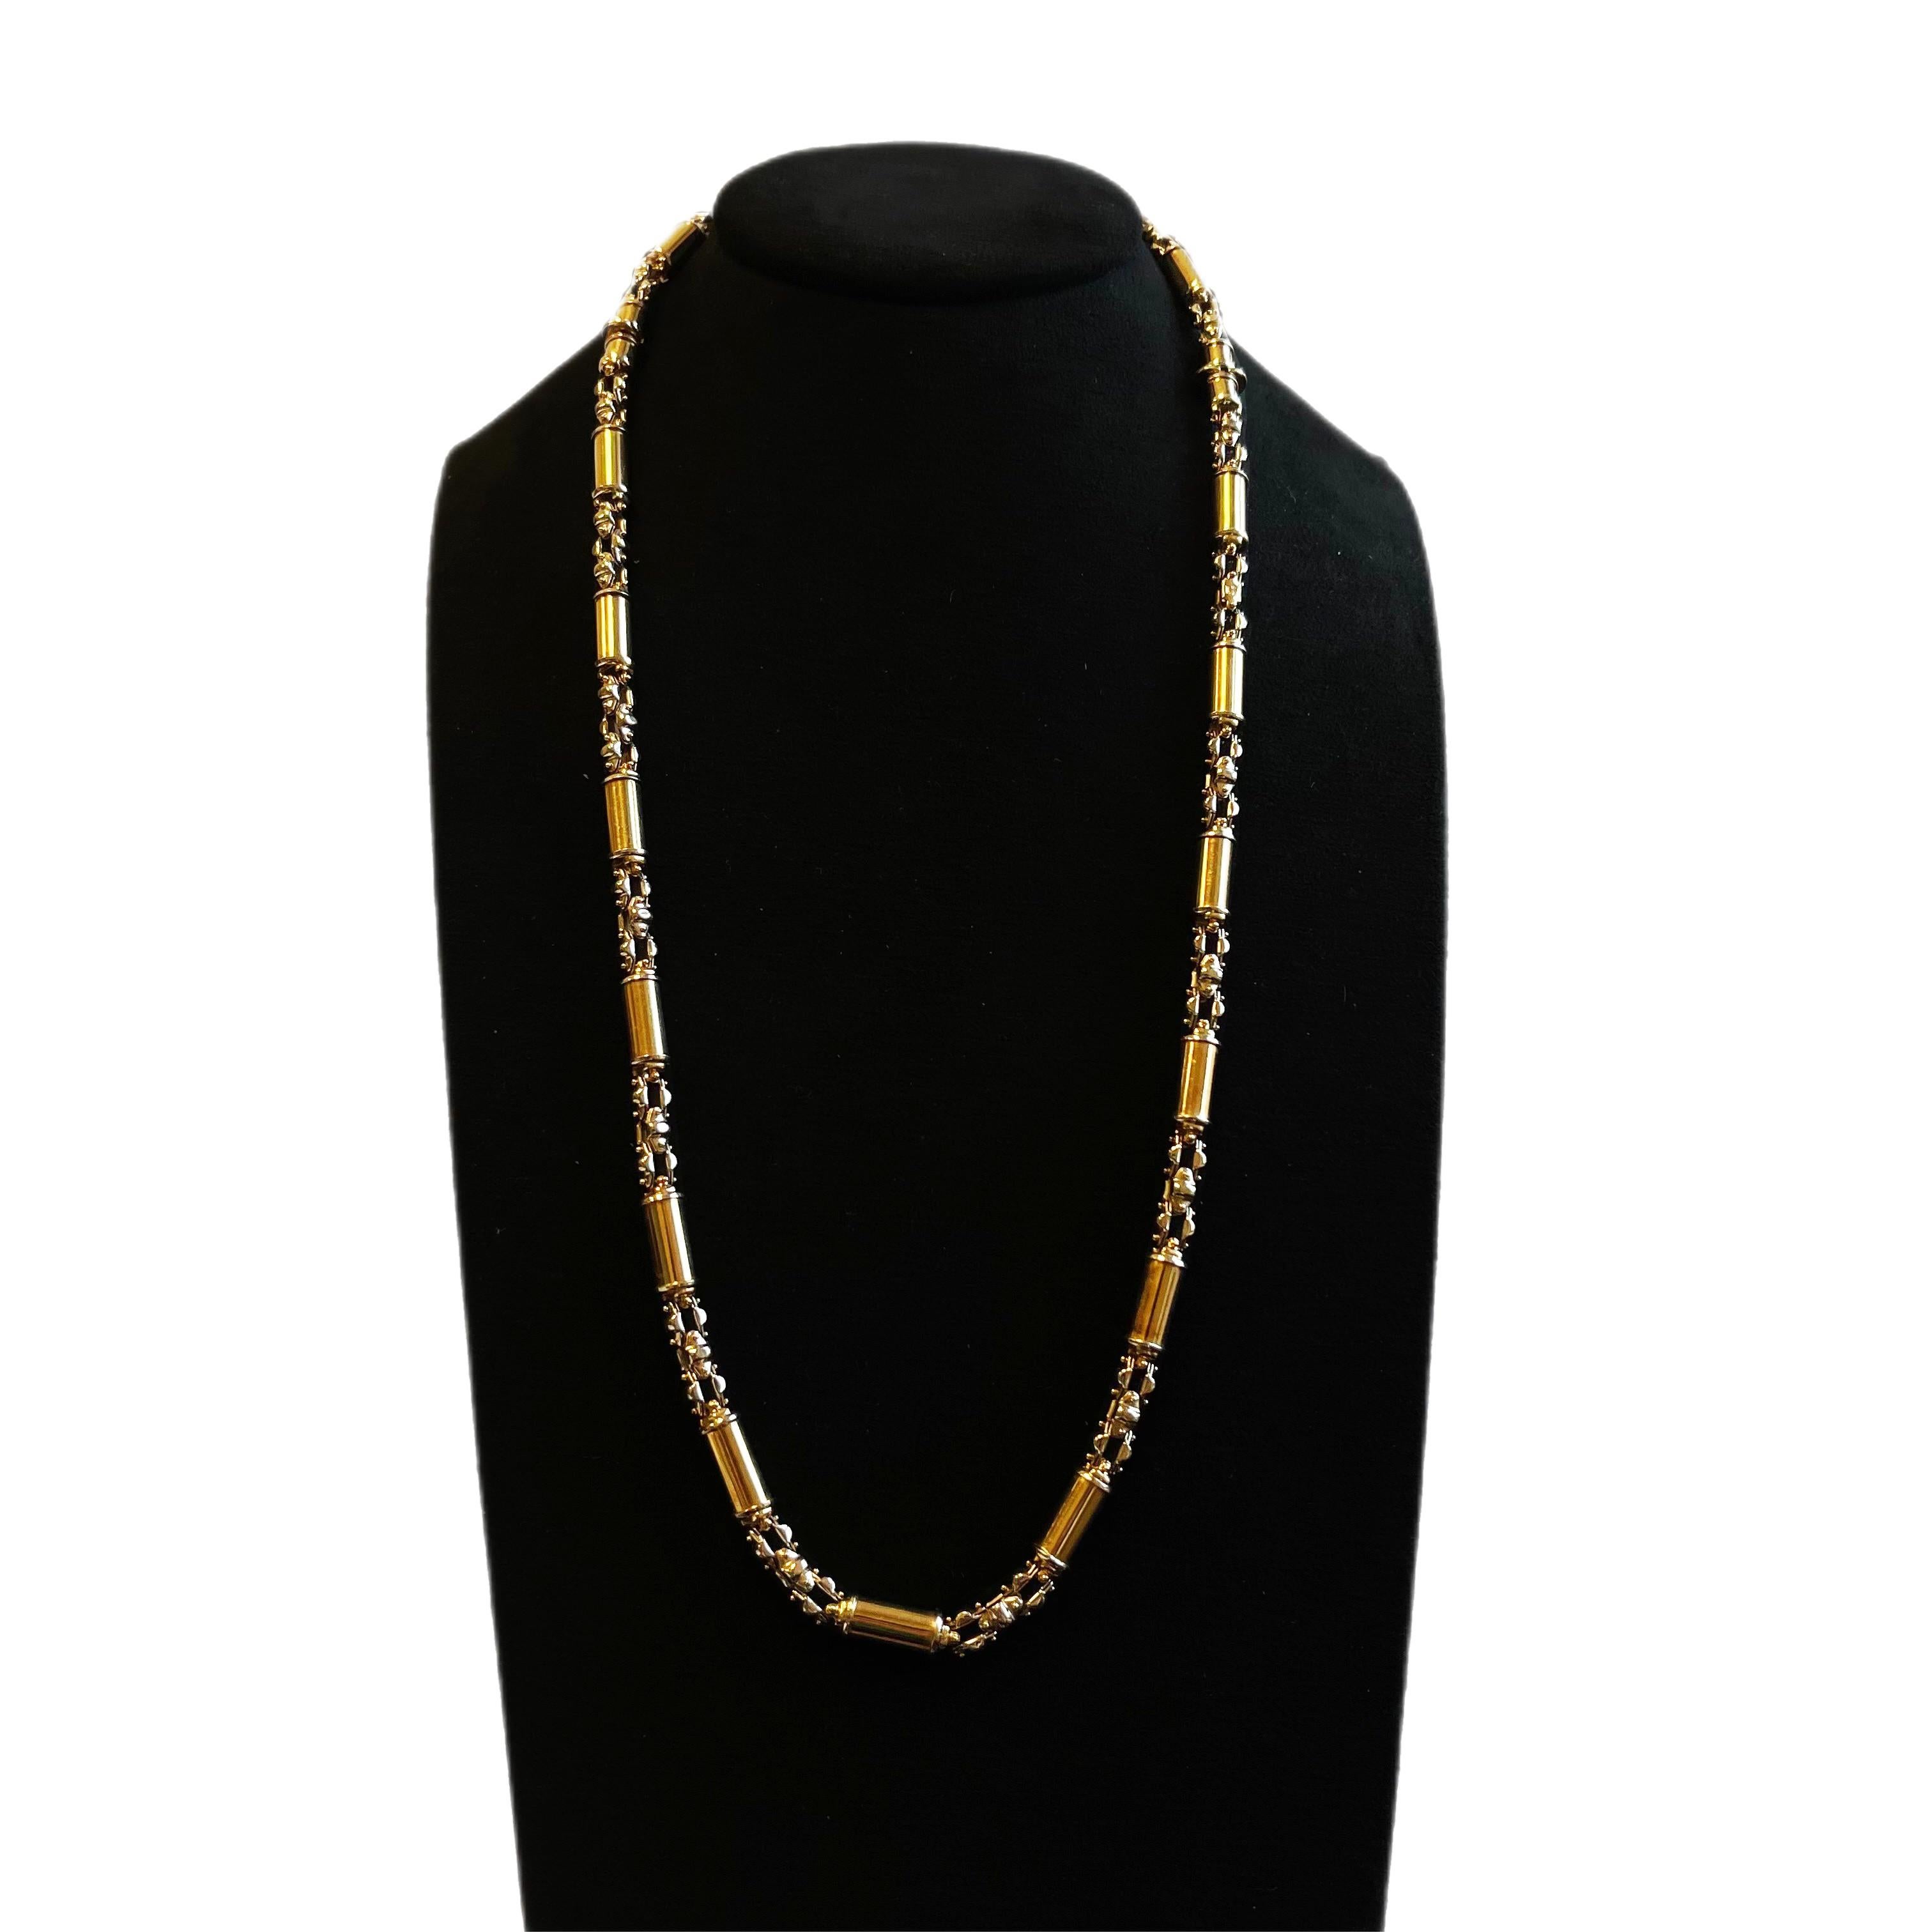 Modern Issac Nussbaum 18k Yellow Gold Necklace and Bracelet For Sale